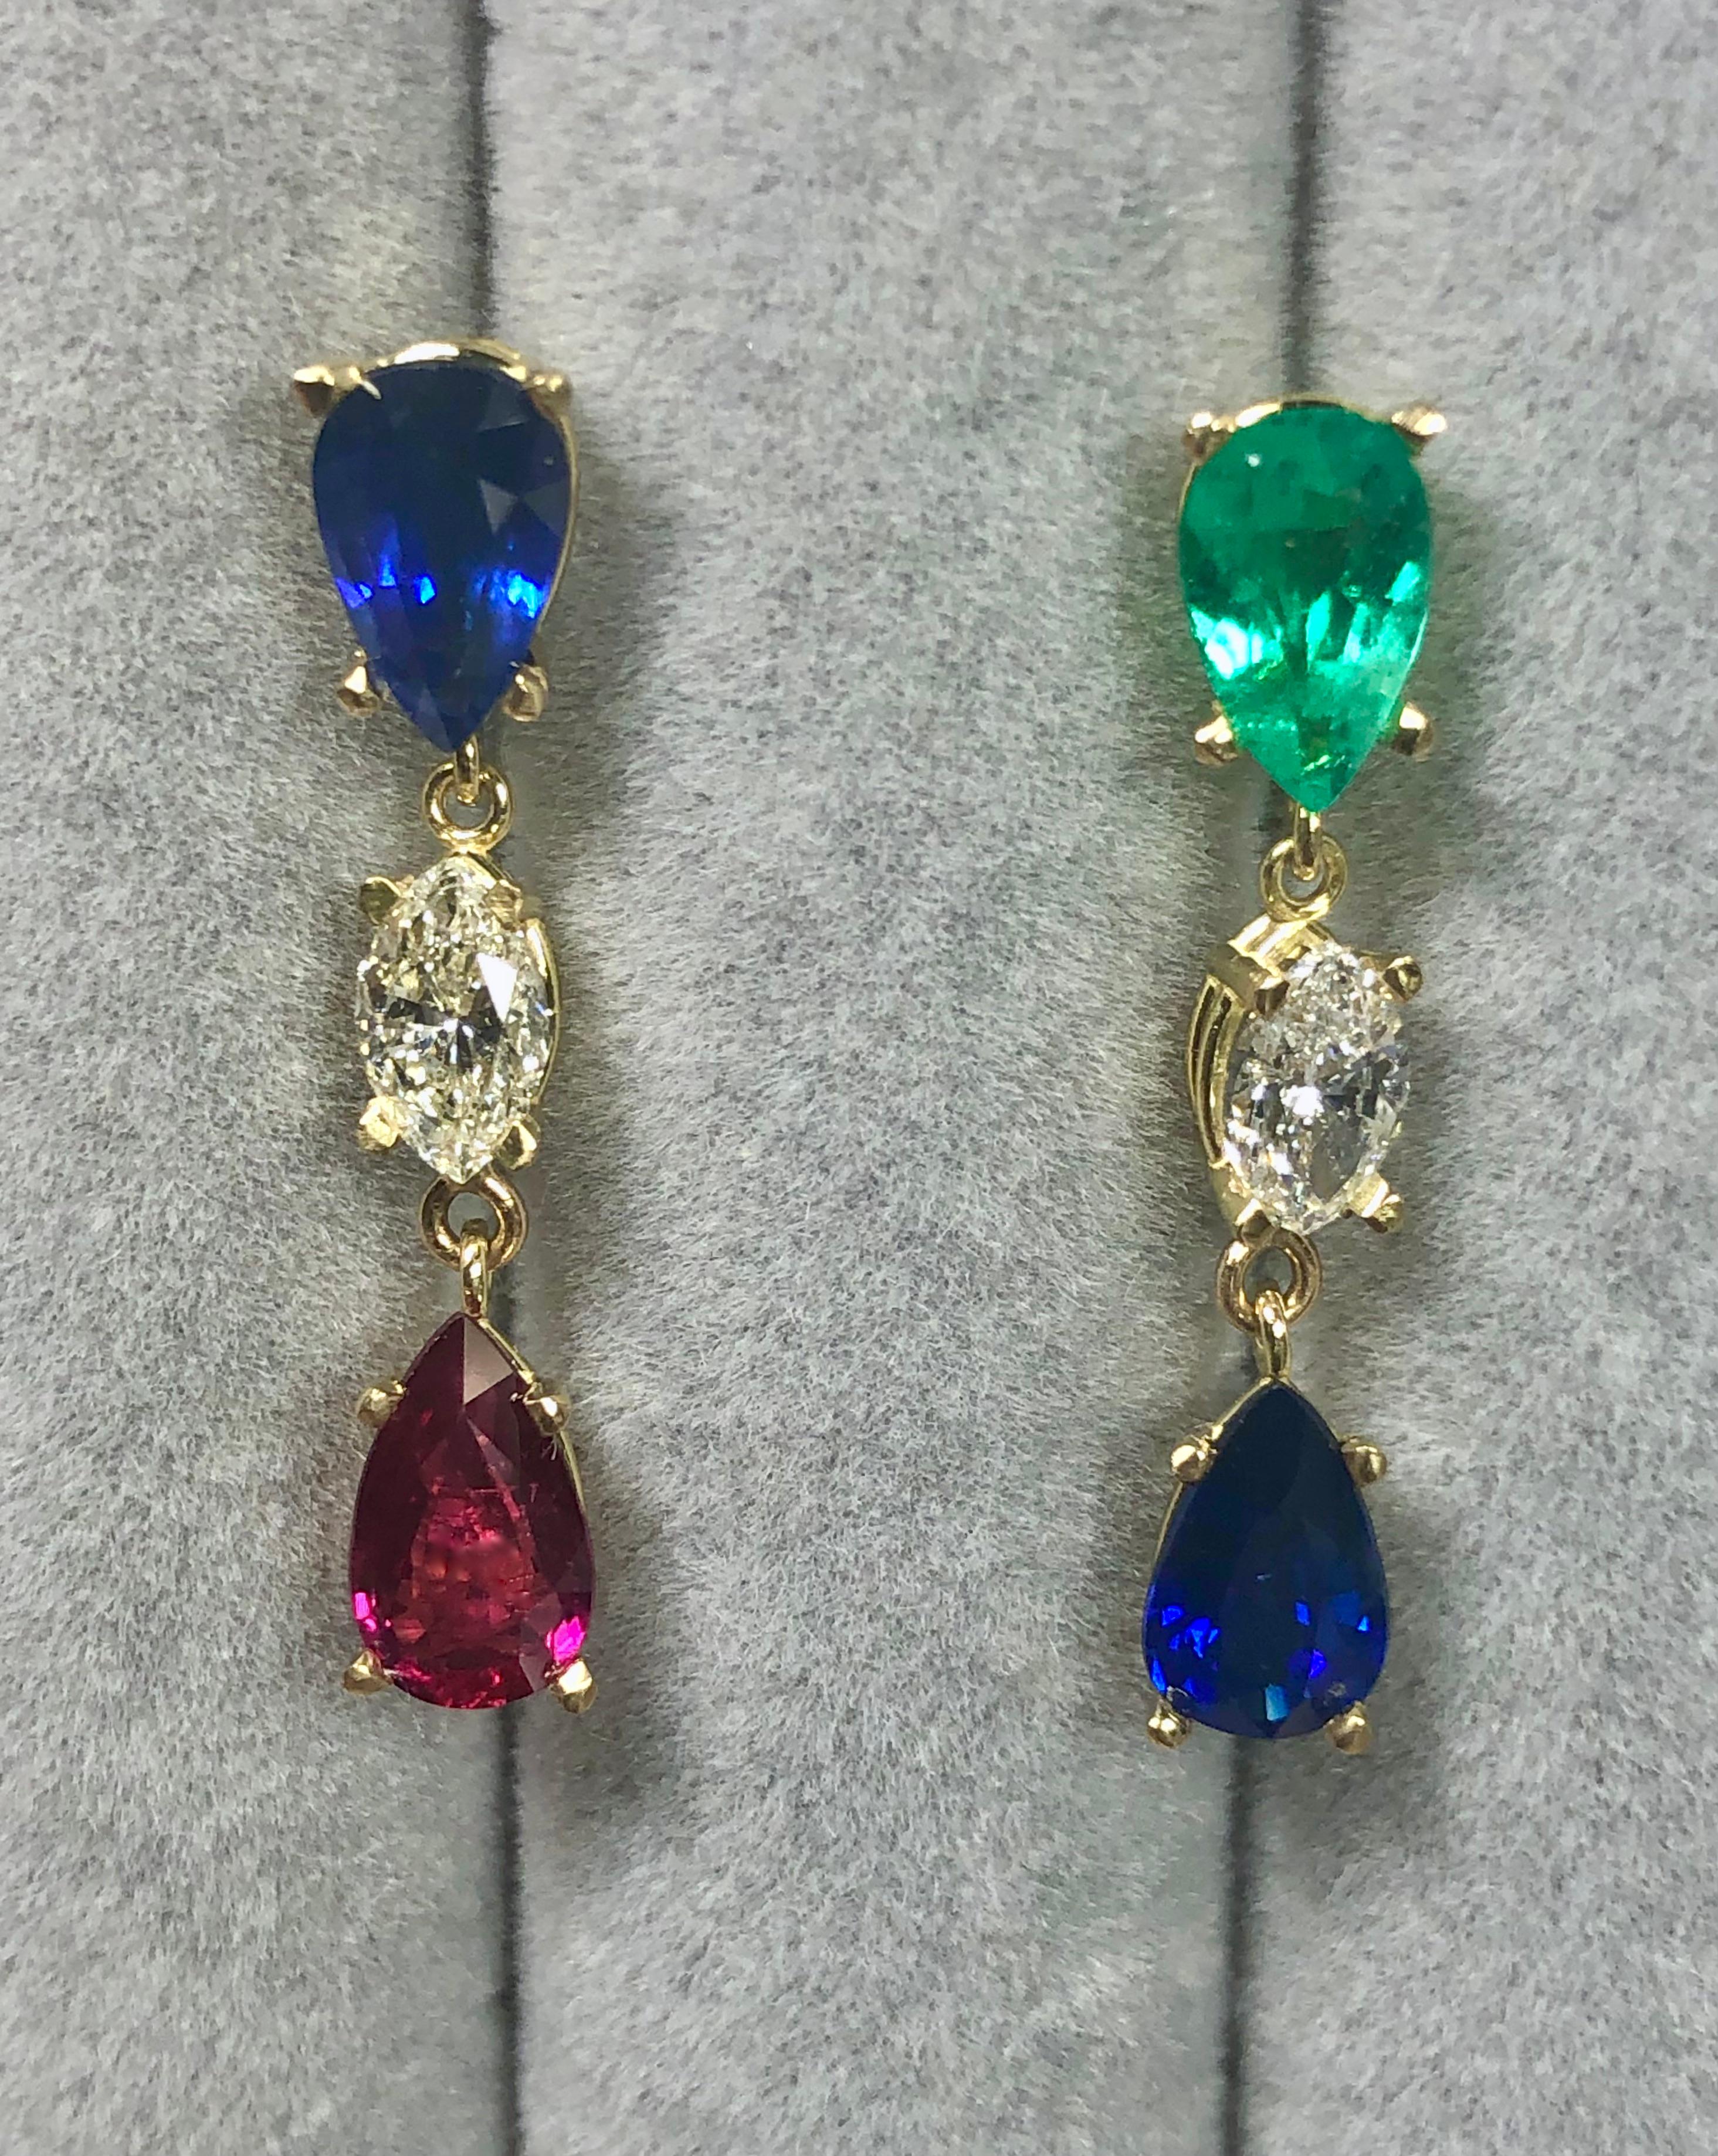 Extraordinary drop dangle earrings designed with blue Burma sapphire, Intense green Colombian emerald, vivid red ruby, and sparkling diamonds. All the natural color gemstones are pear-cut, they have excellent clarity and transparency, bold color.